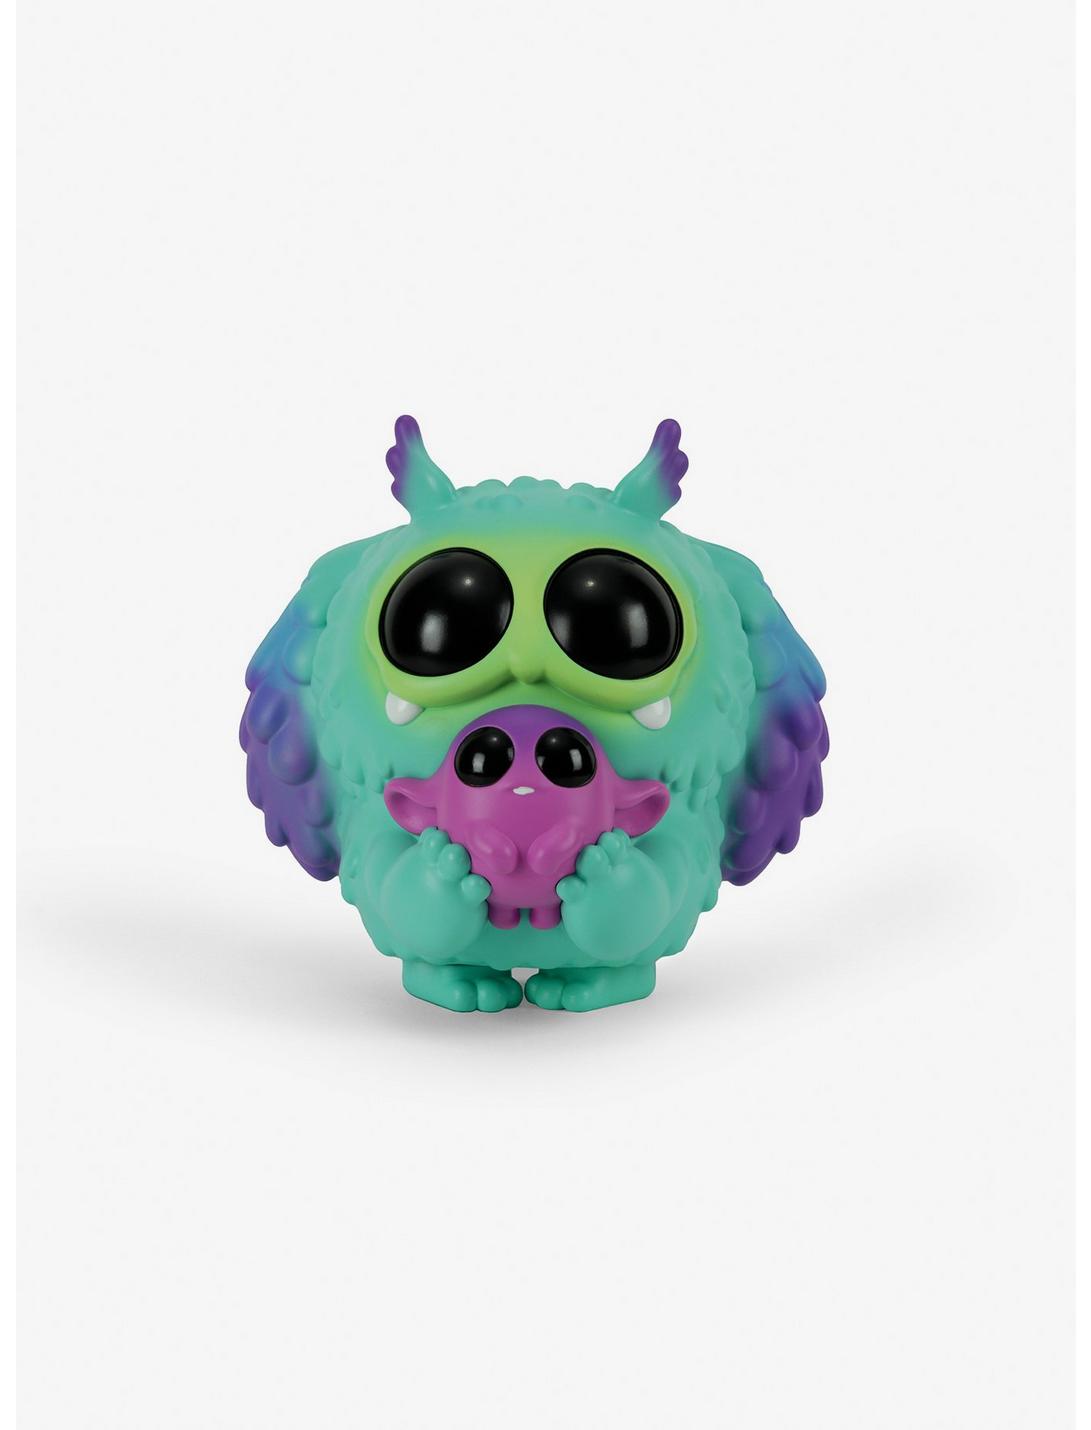 Thimblestump Hollow Chickory series 2 Vinyl Rare Hot Topic Exclusive 